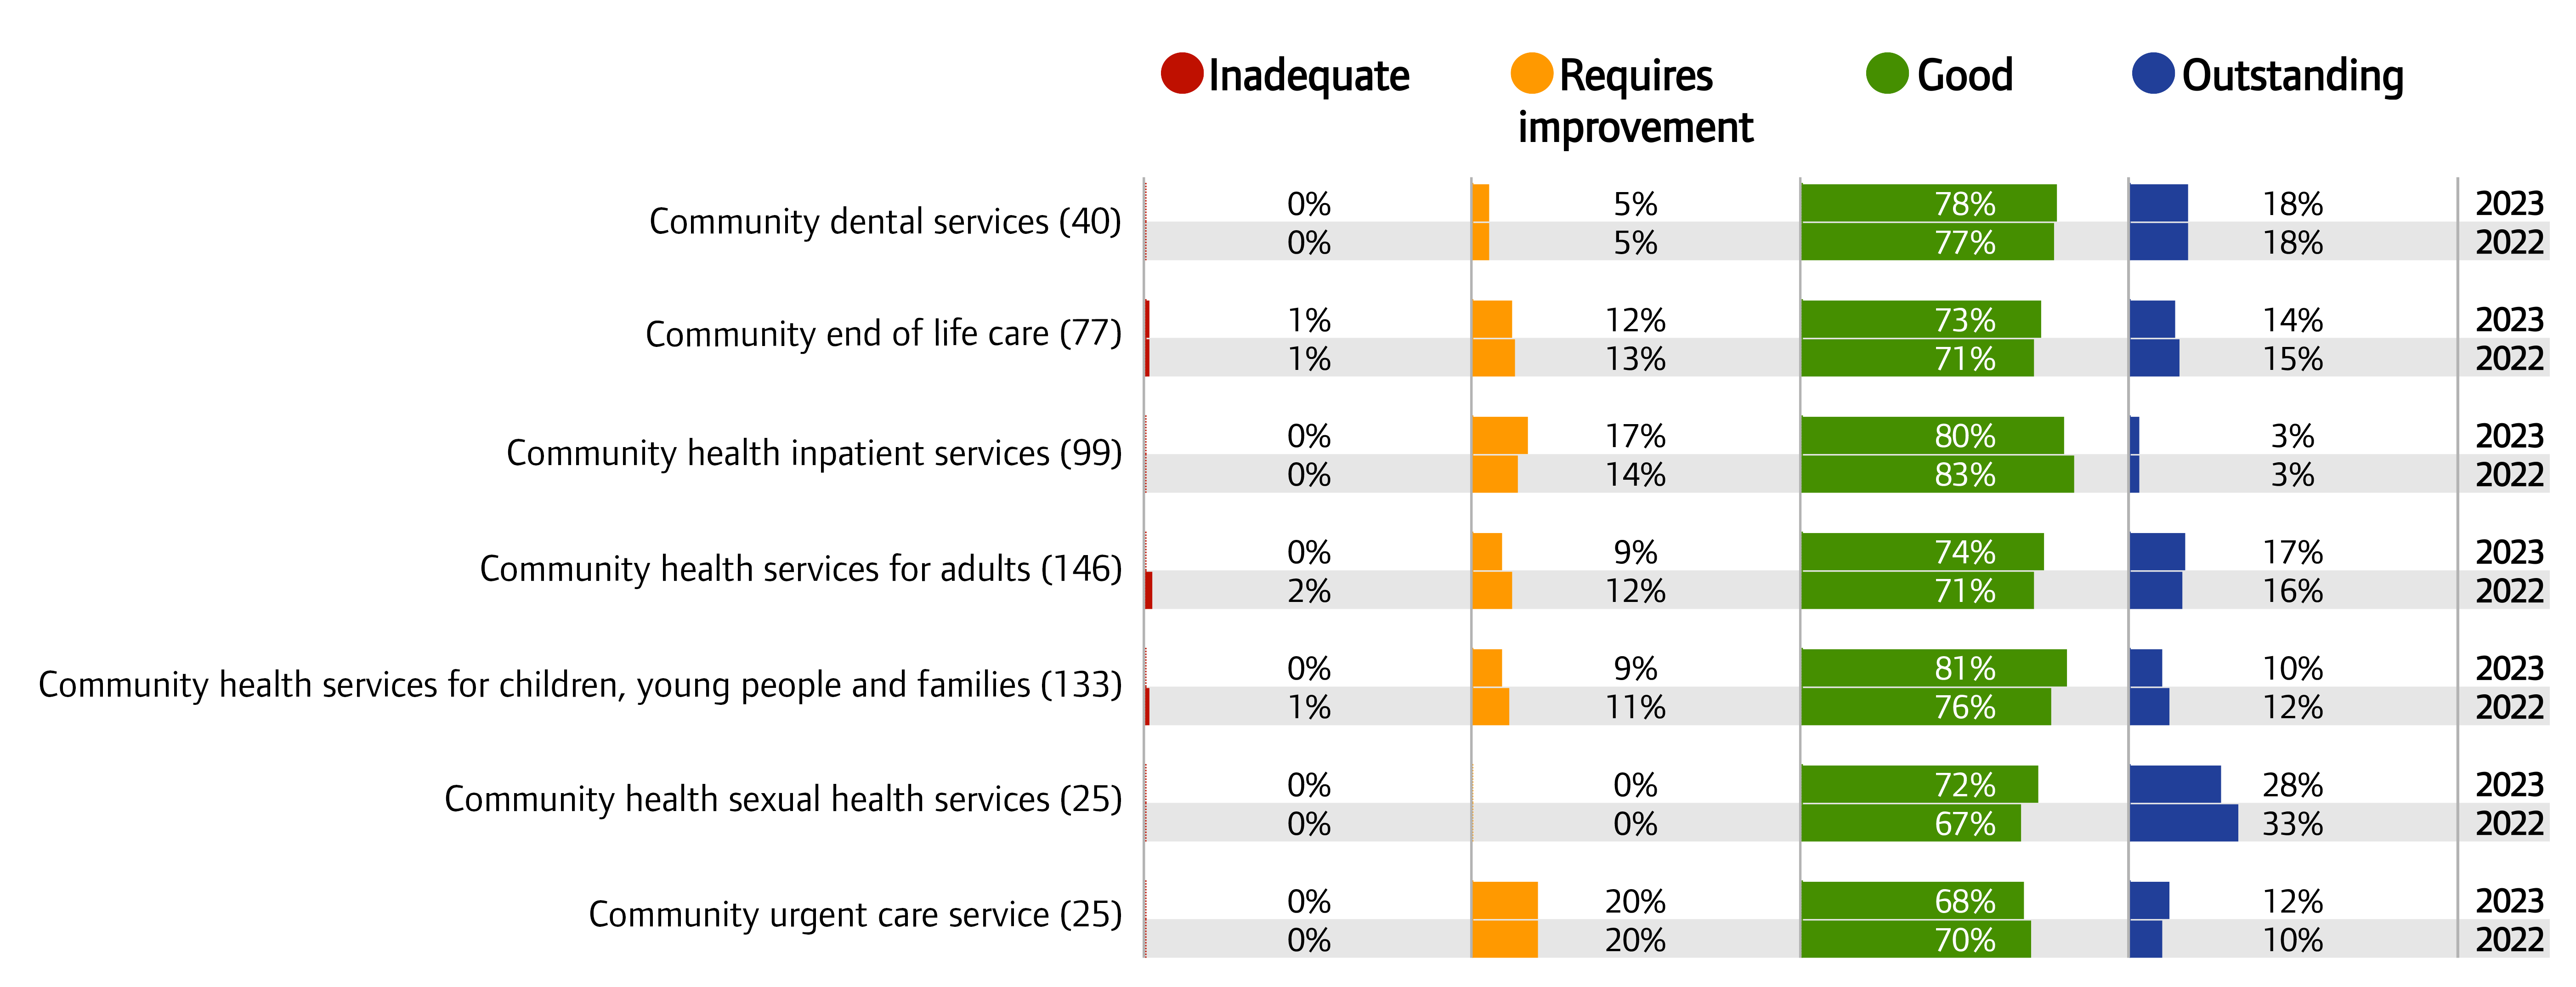 Chart showing overall ratings for community health services in all settings